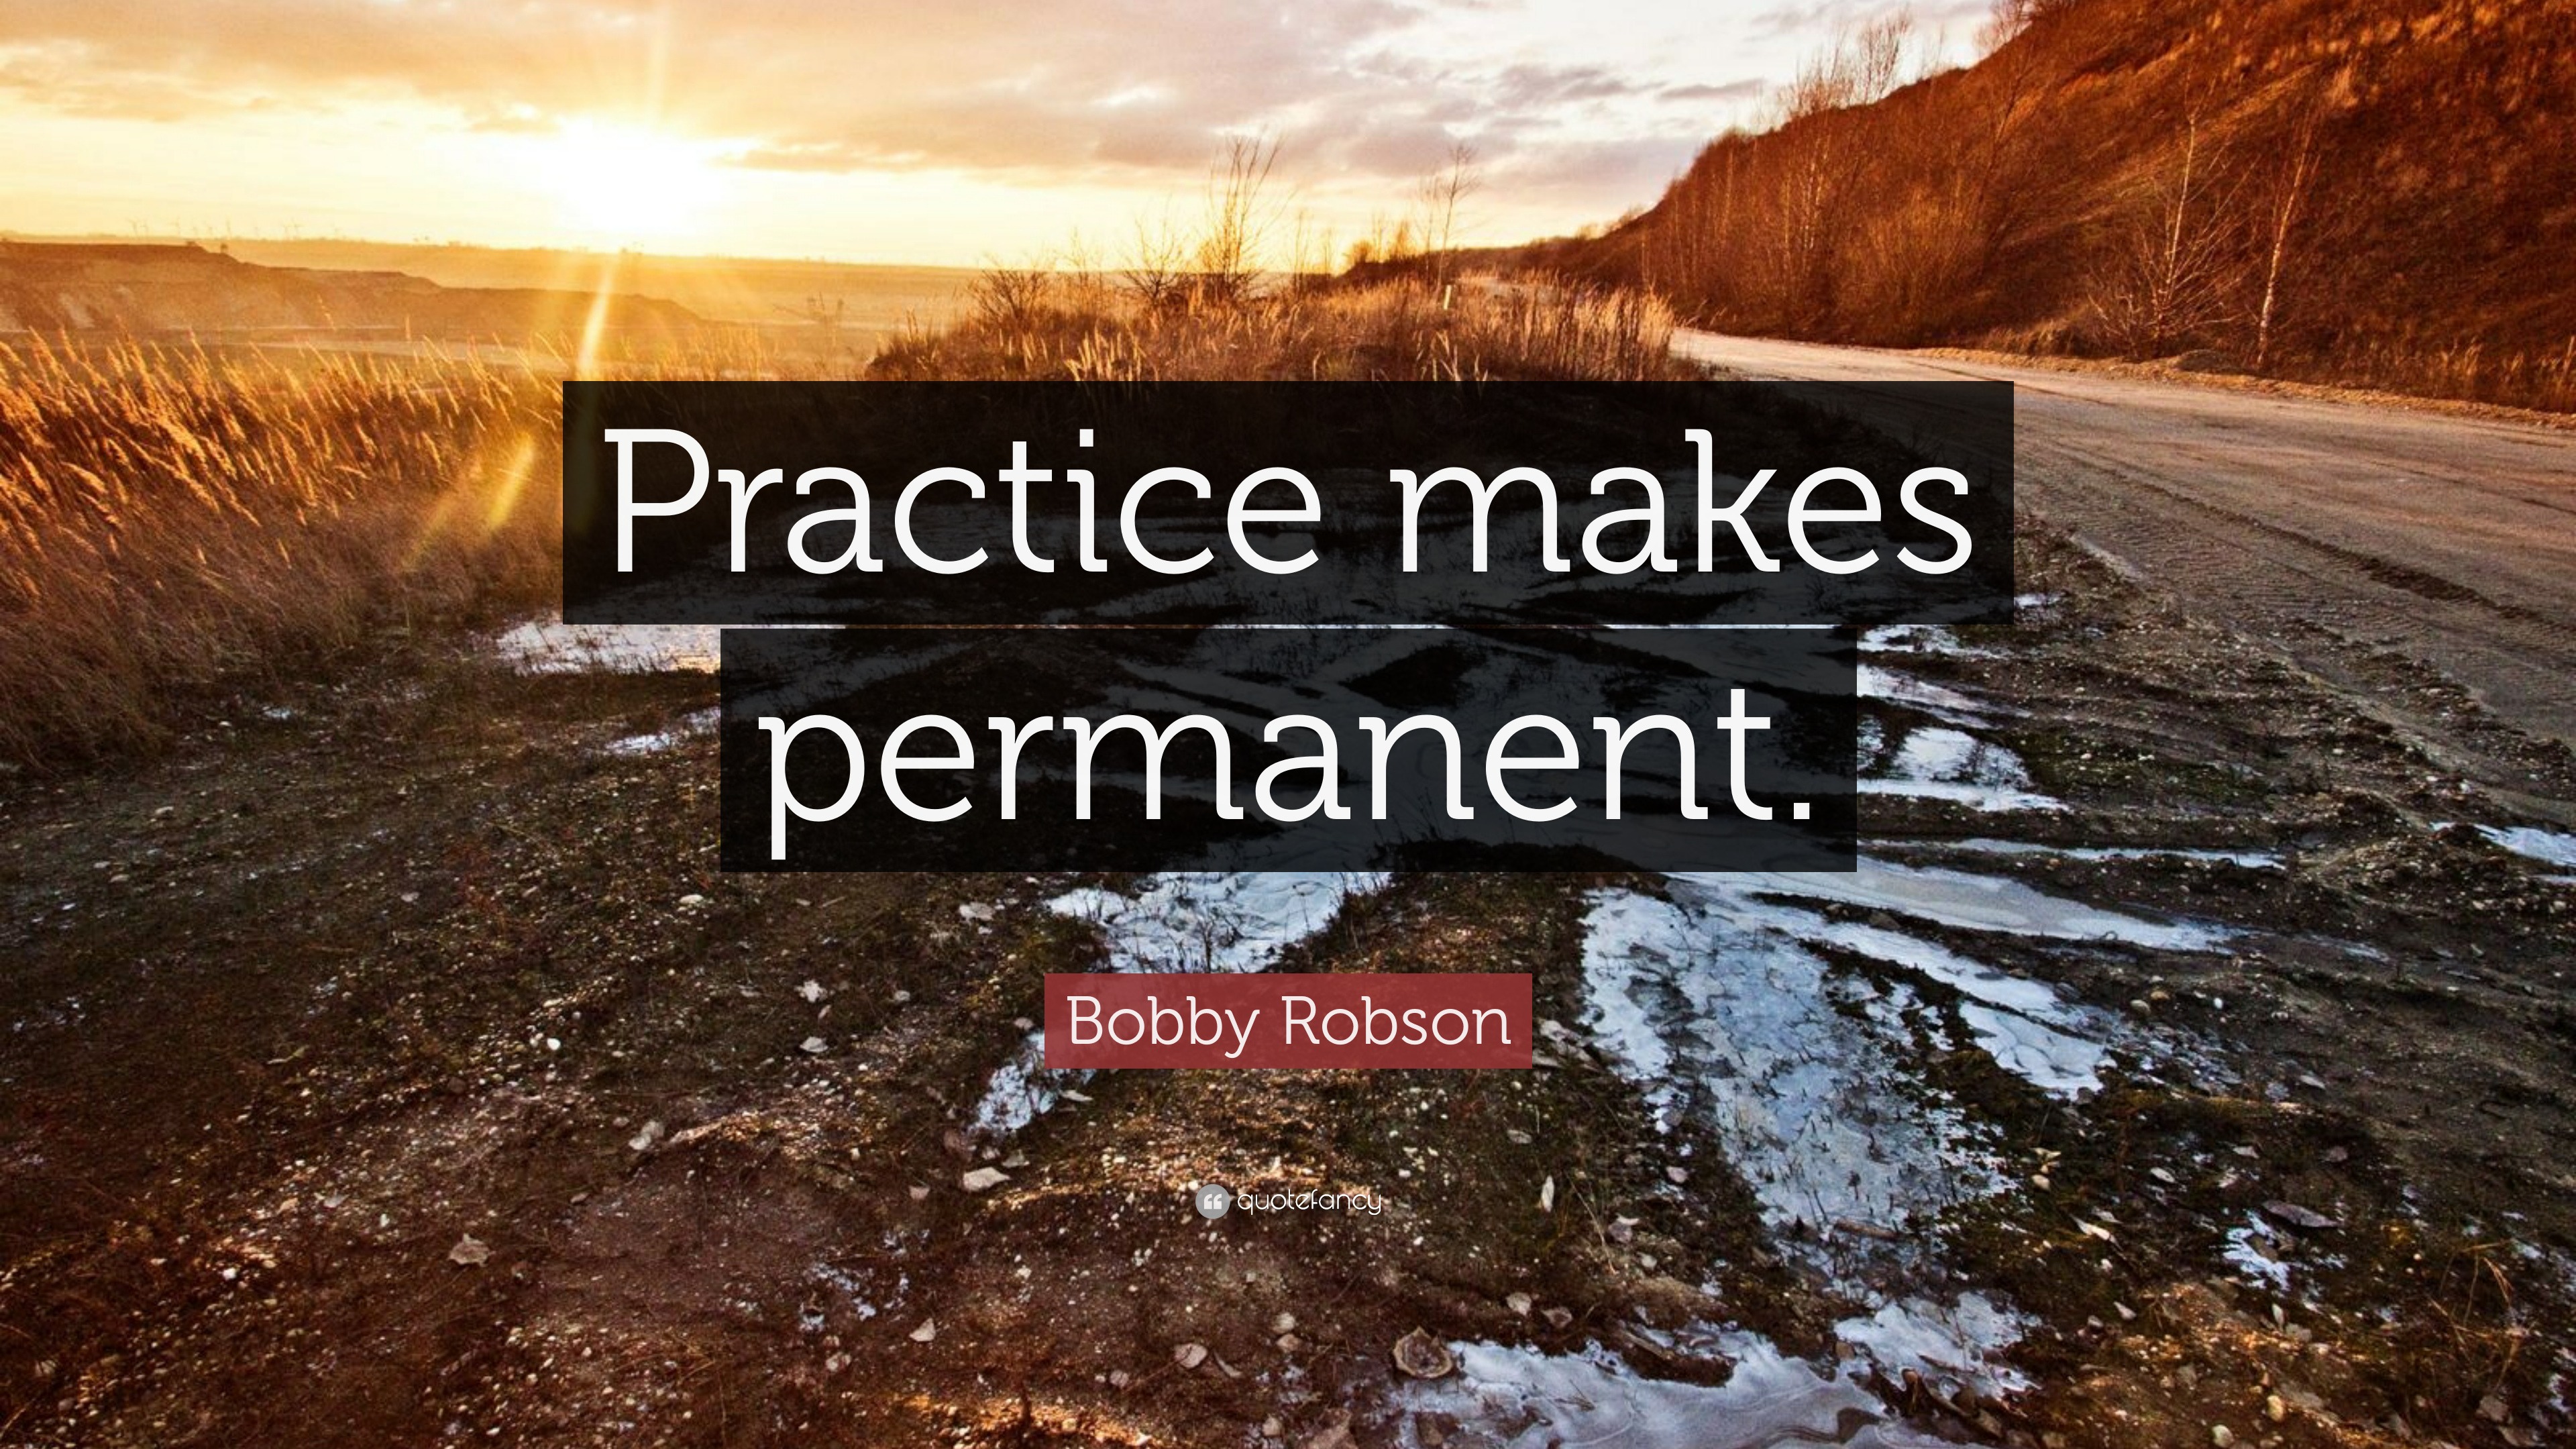 Bobby Robson Quote: "Practice makes permanent." (12 wallpapers) - Quotefancy